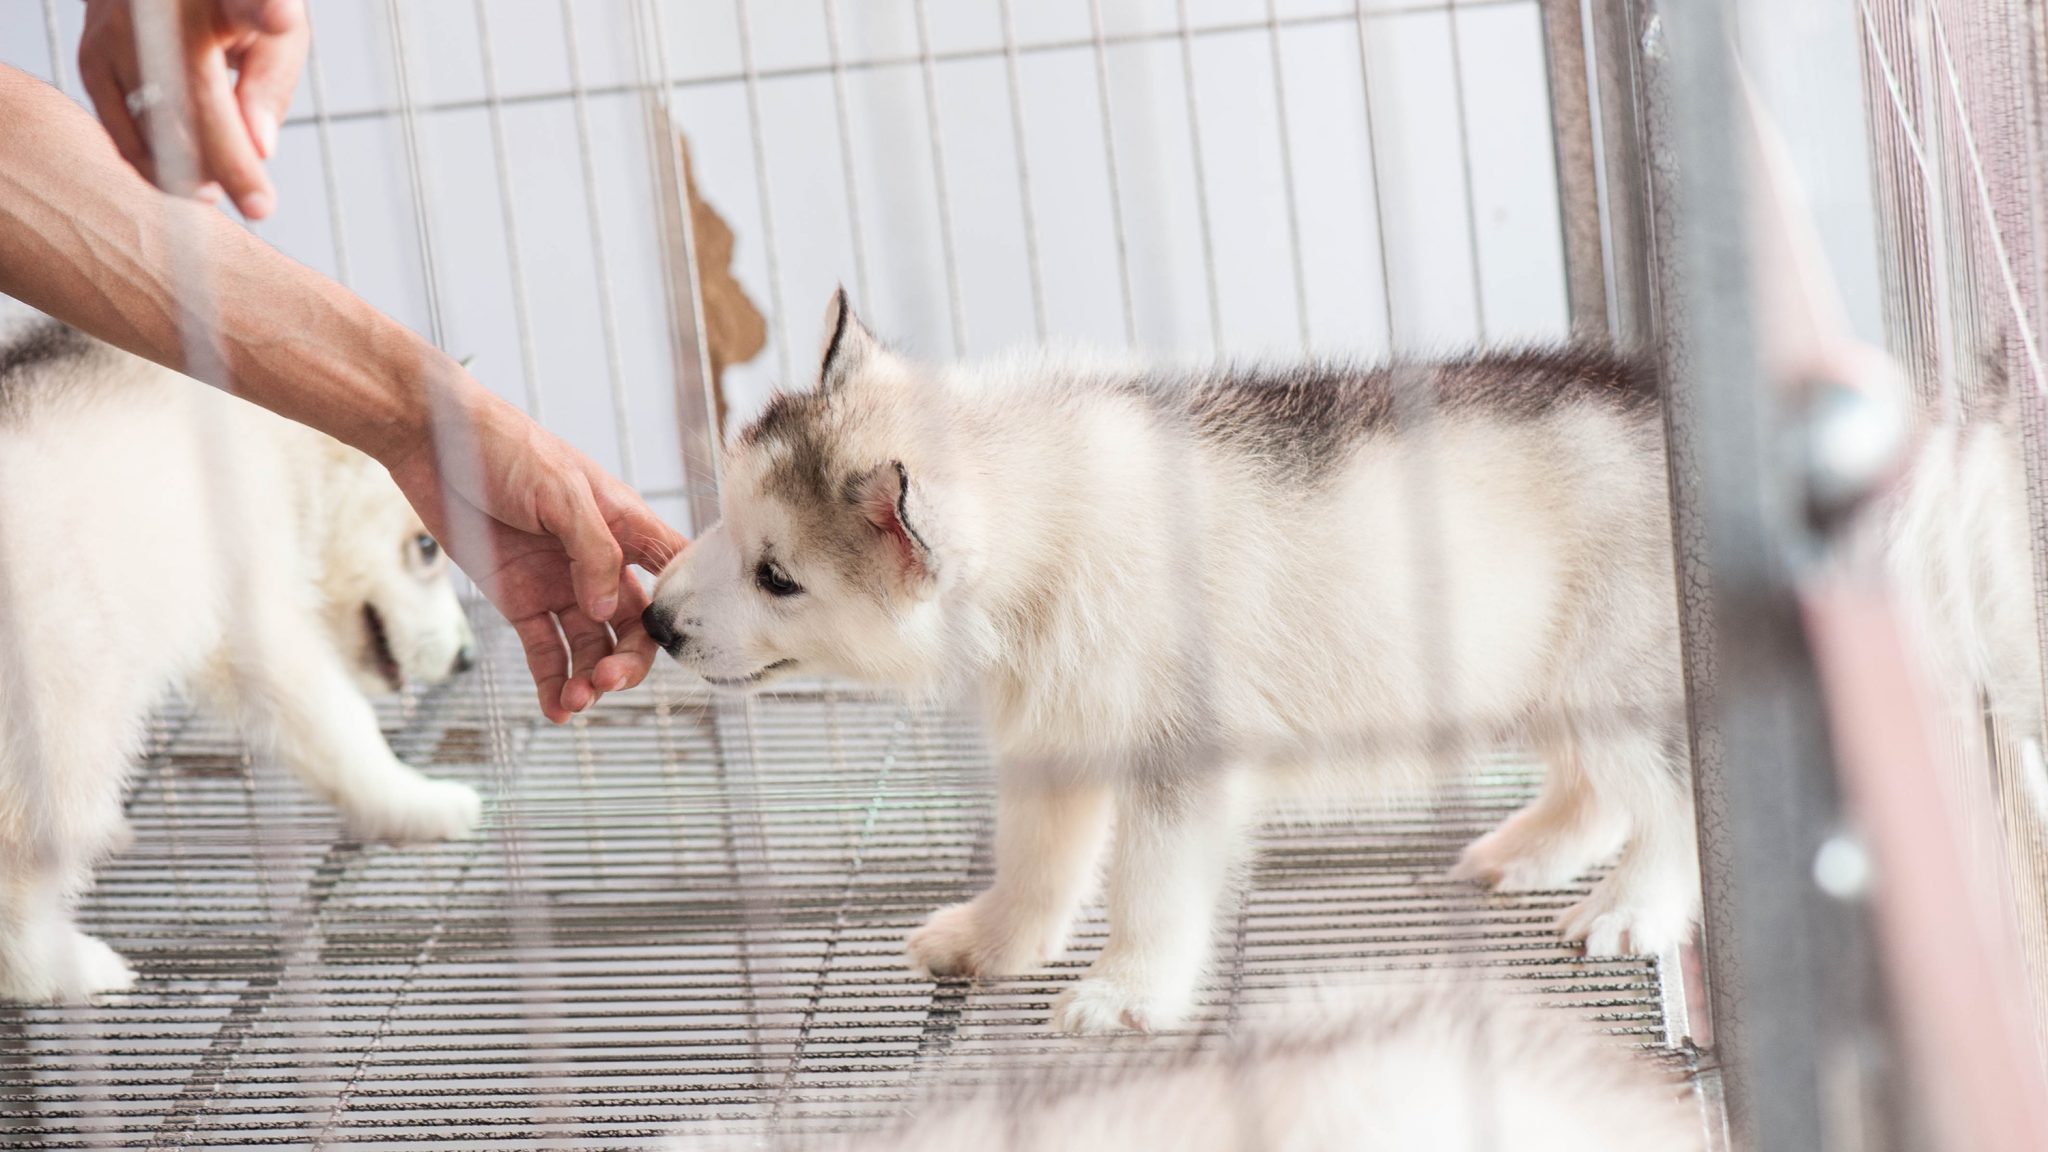 What To Do When You Find Animals in Substandard Conditions at a Pet Store